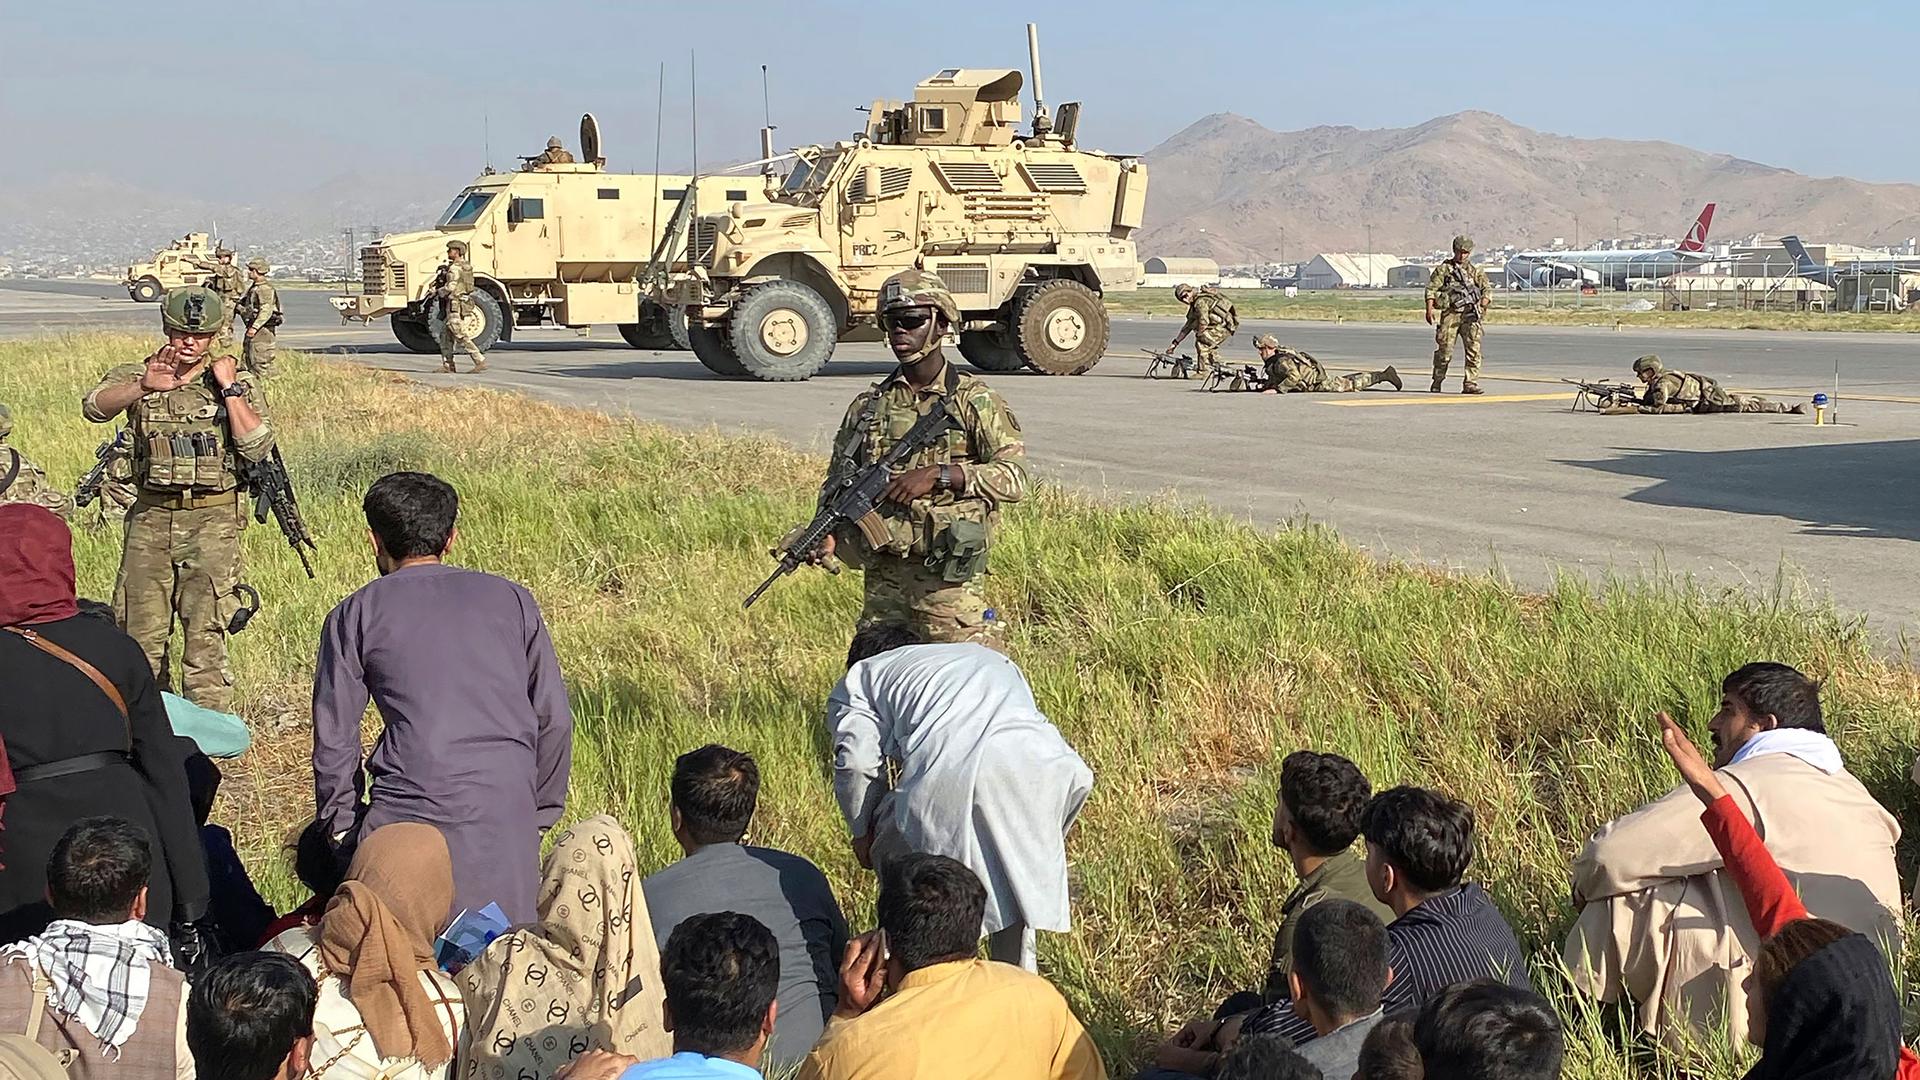 Several US military personnel are show standing guard next to the runways of the Kabul airport with two large military vehicles in the distance.